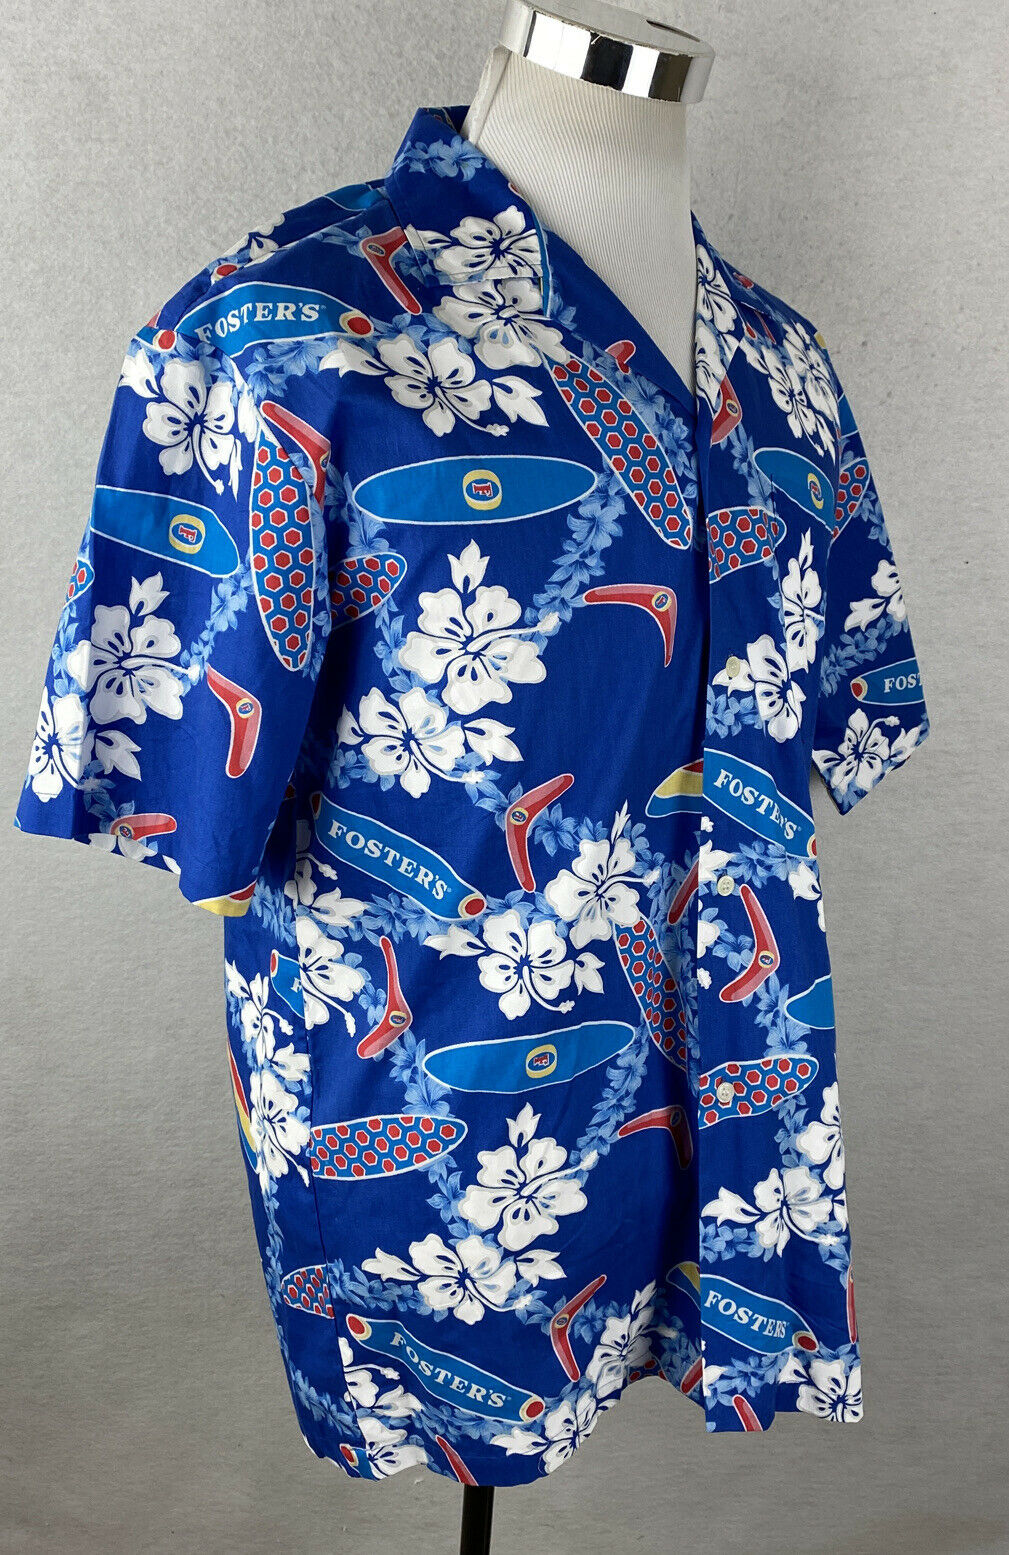 Fosters lager Hawaiian Shirt, Beach shorts - Picture 3